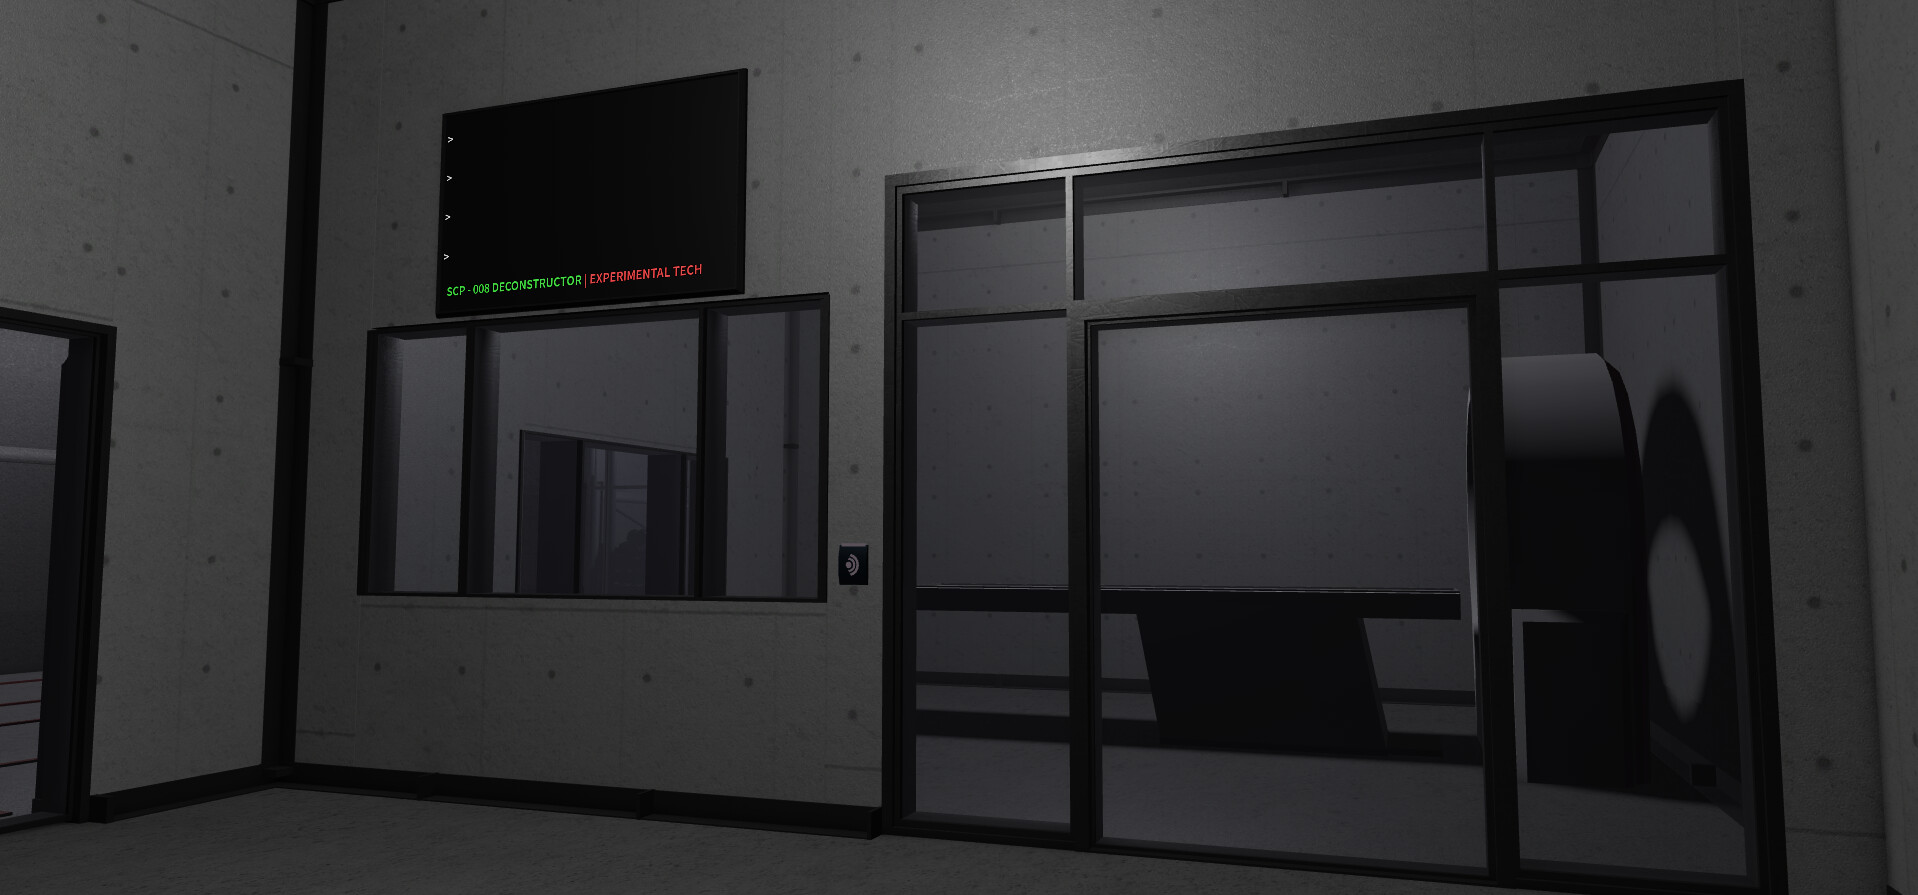 C4D] SCP-008 containment chamber by BombaSticked on DeviantArt